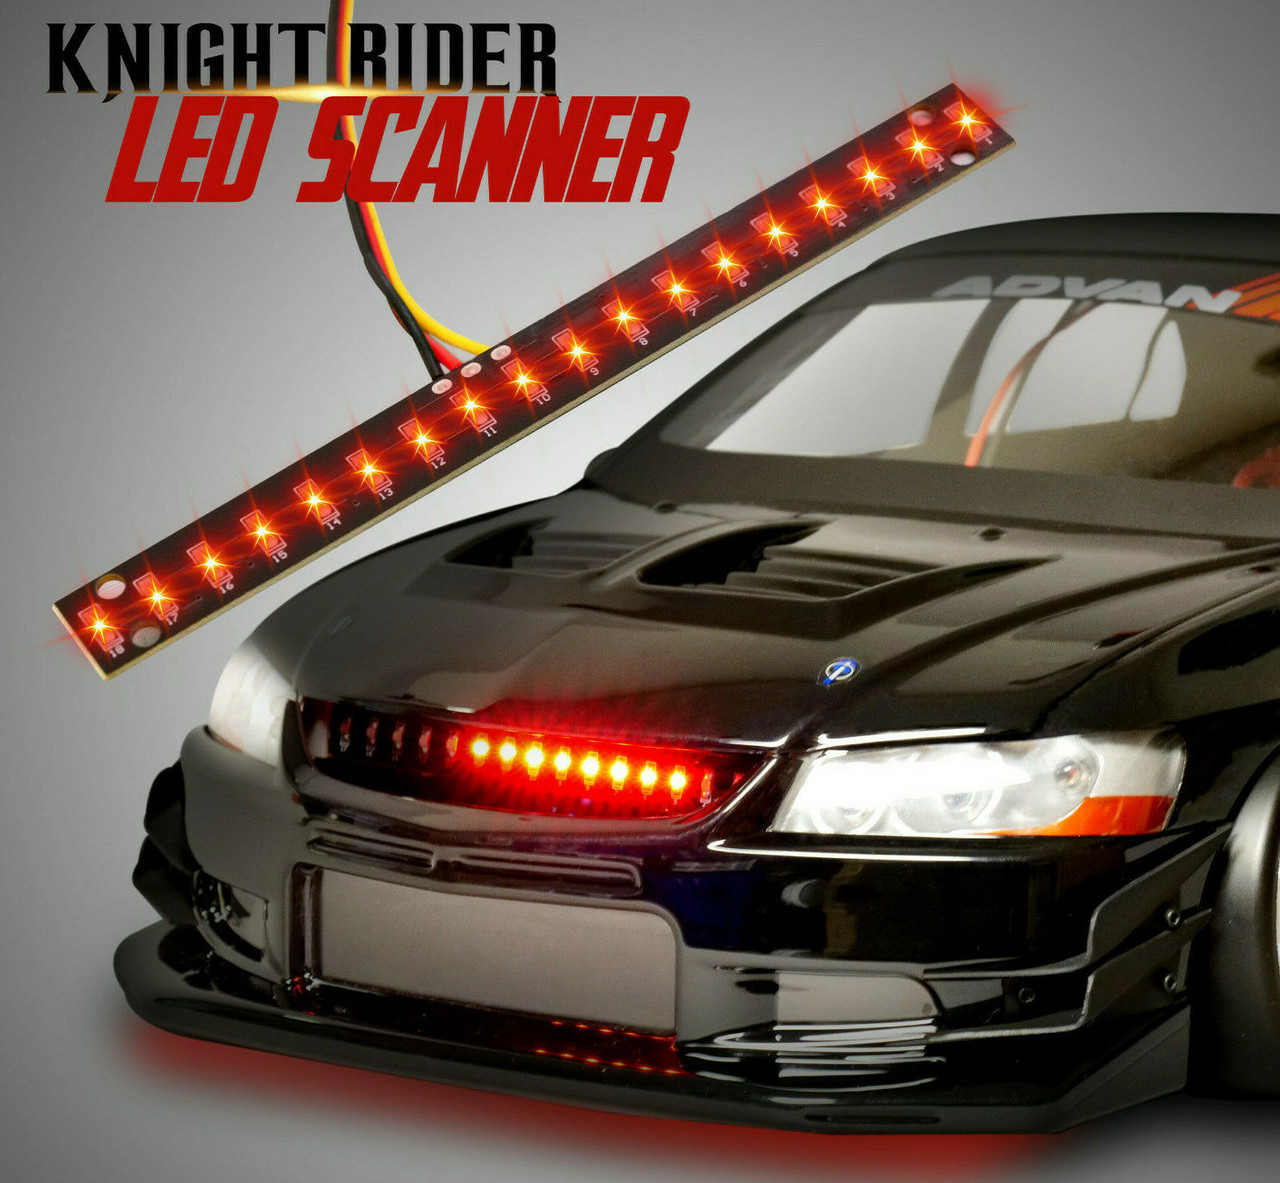 1/10 RC LED Scanner KNIGHT RIDER Effect Light Bar RED